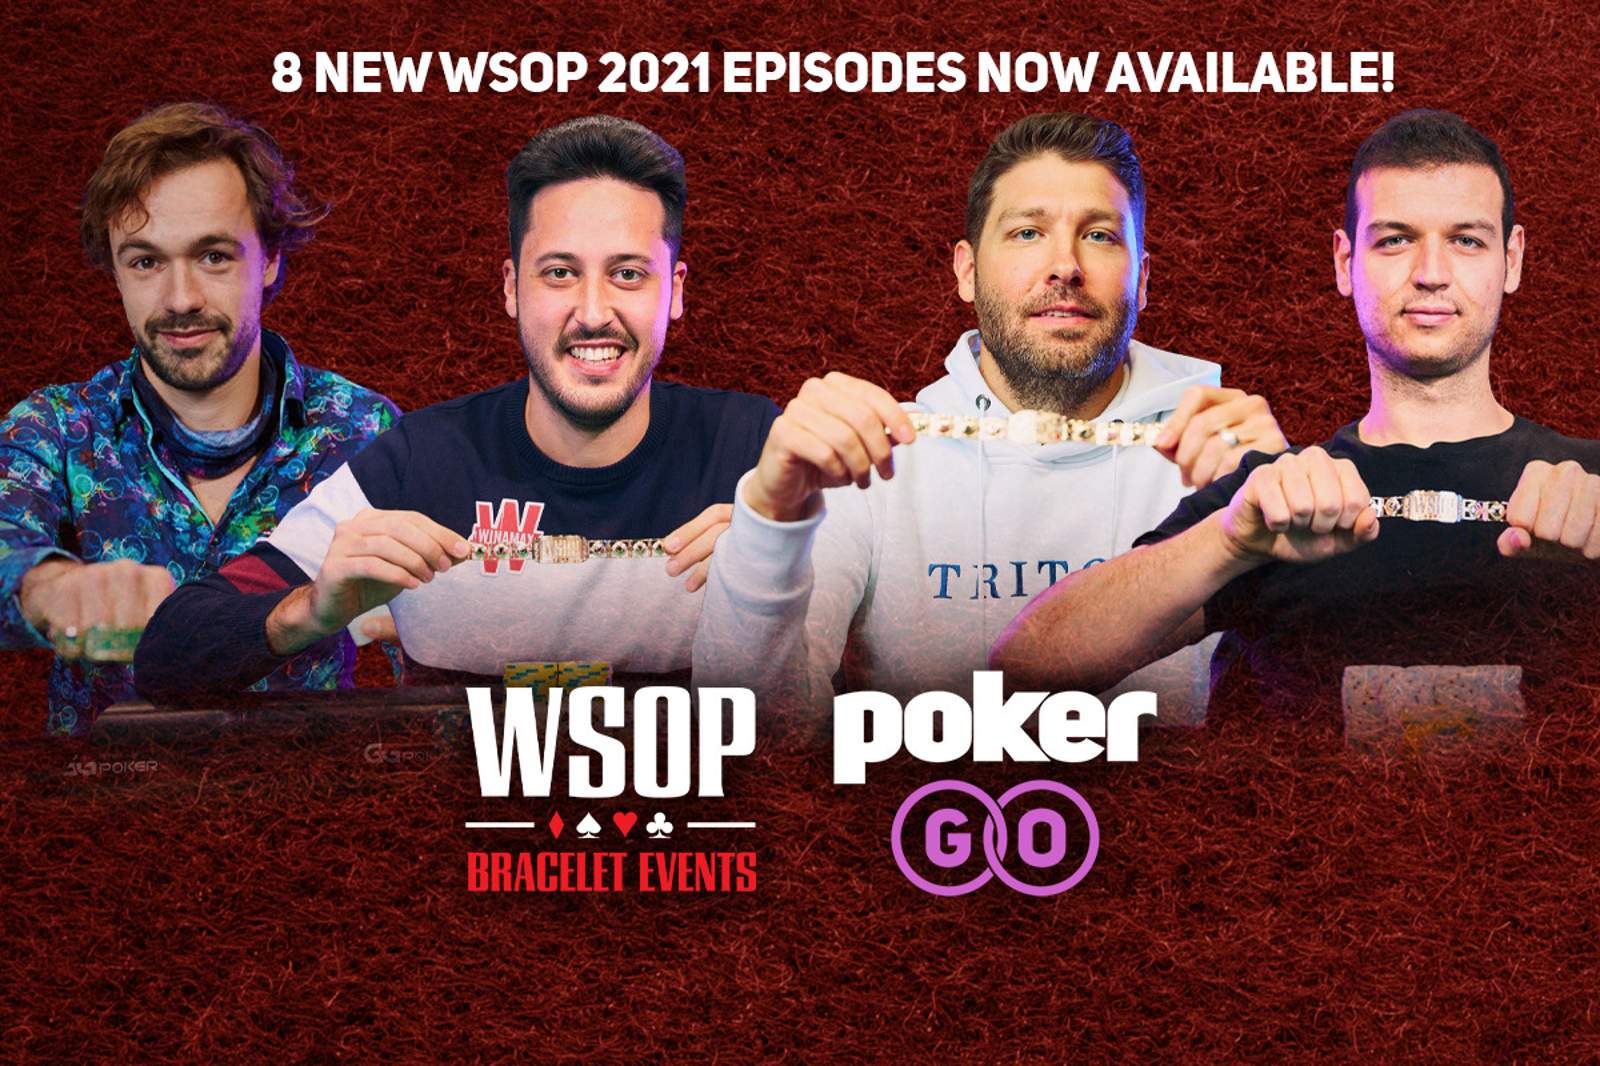 Episodes 29-36 Now Available from 2021 WSOP Bracelet Events